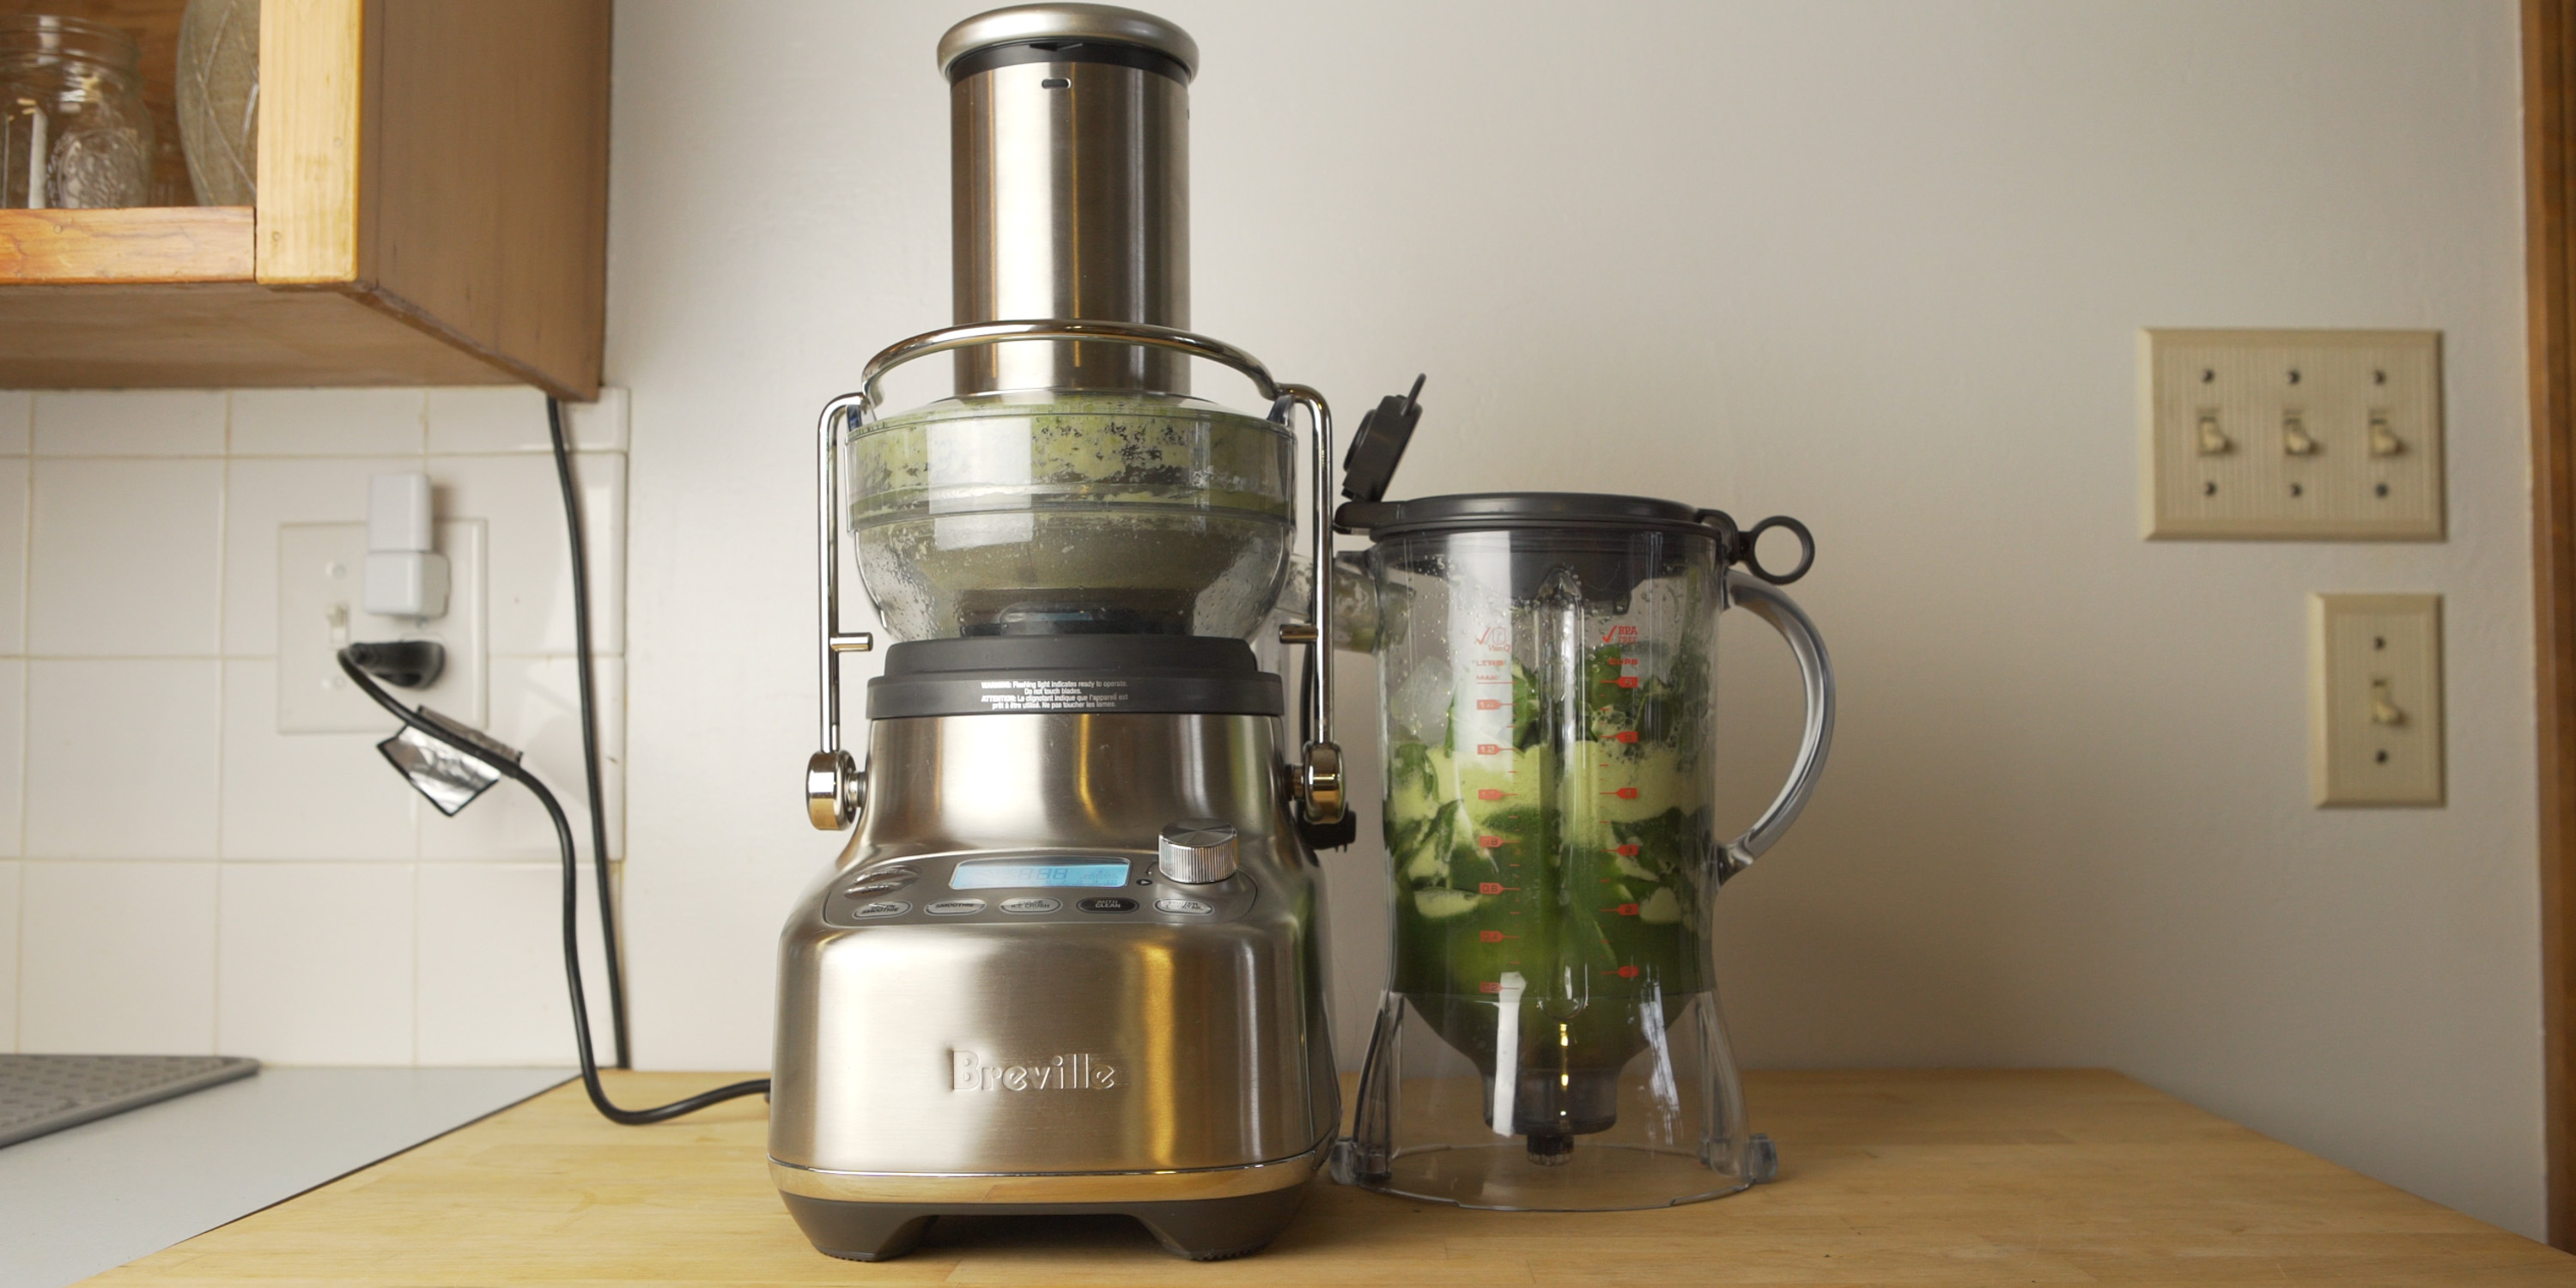 Breville 3X Bluicer Pro Review: Trying out this new kitchen mash-up